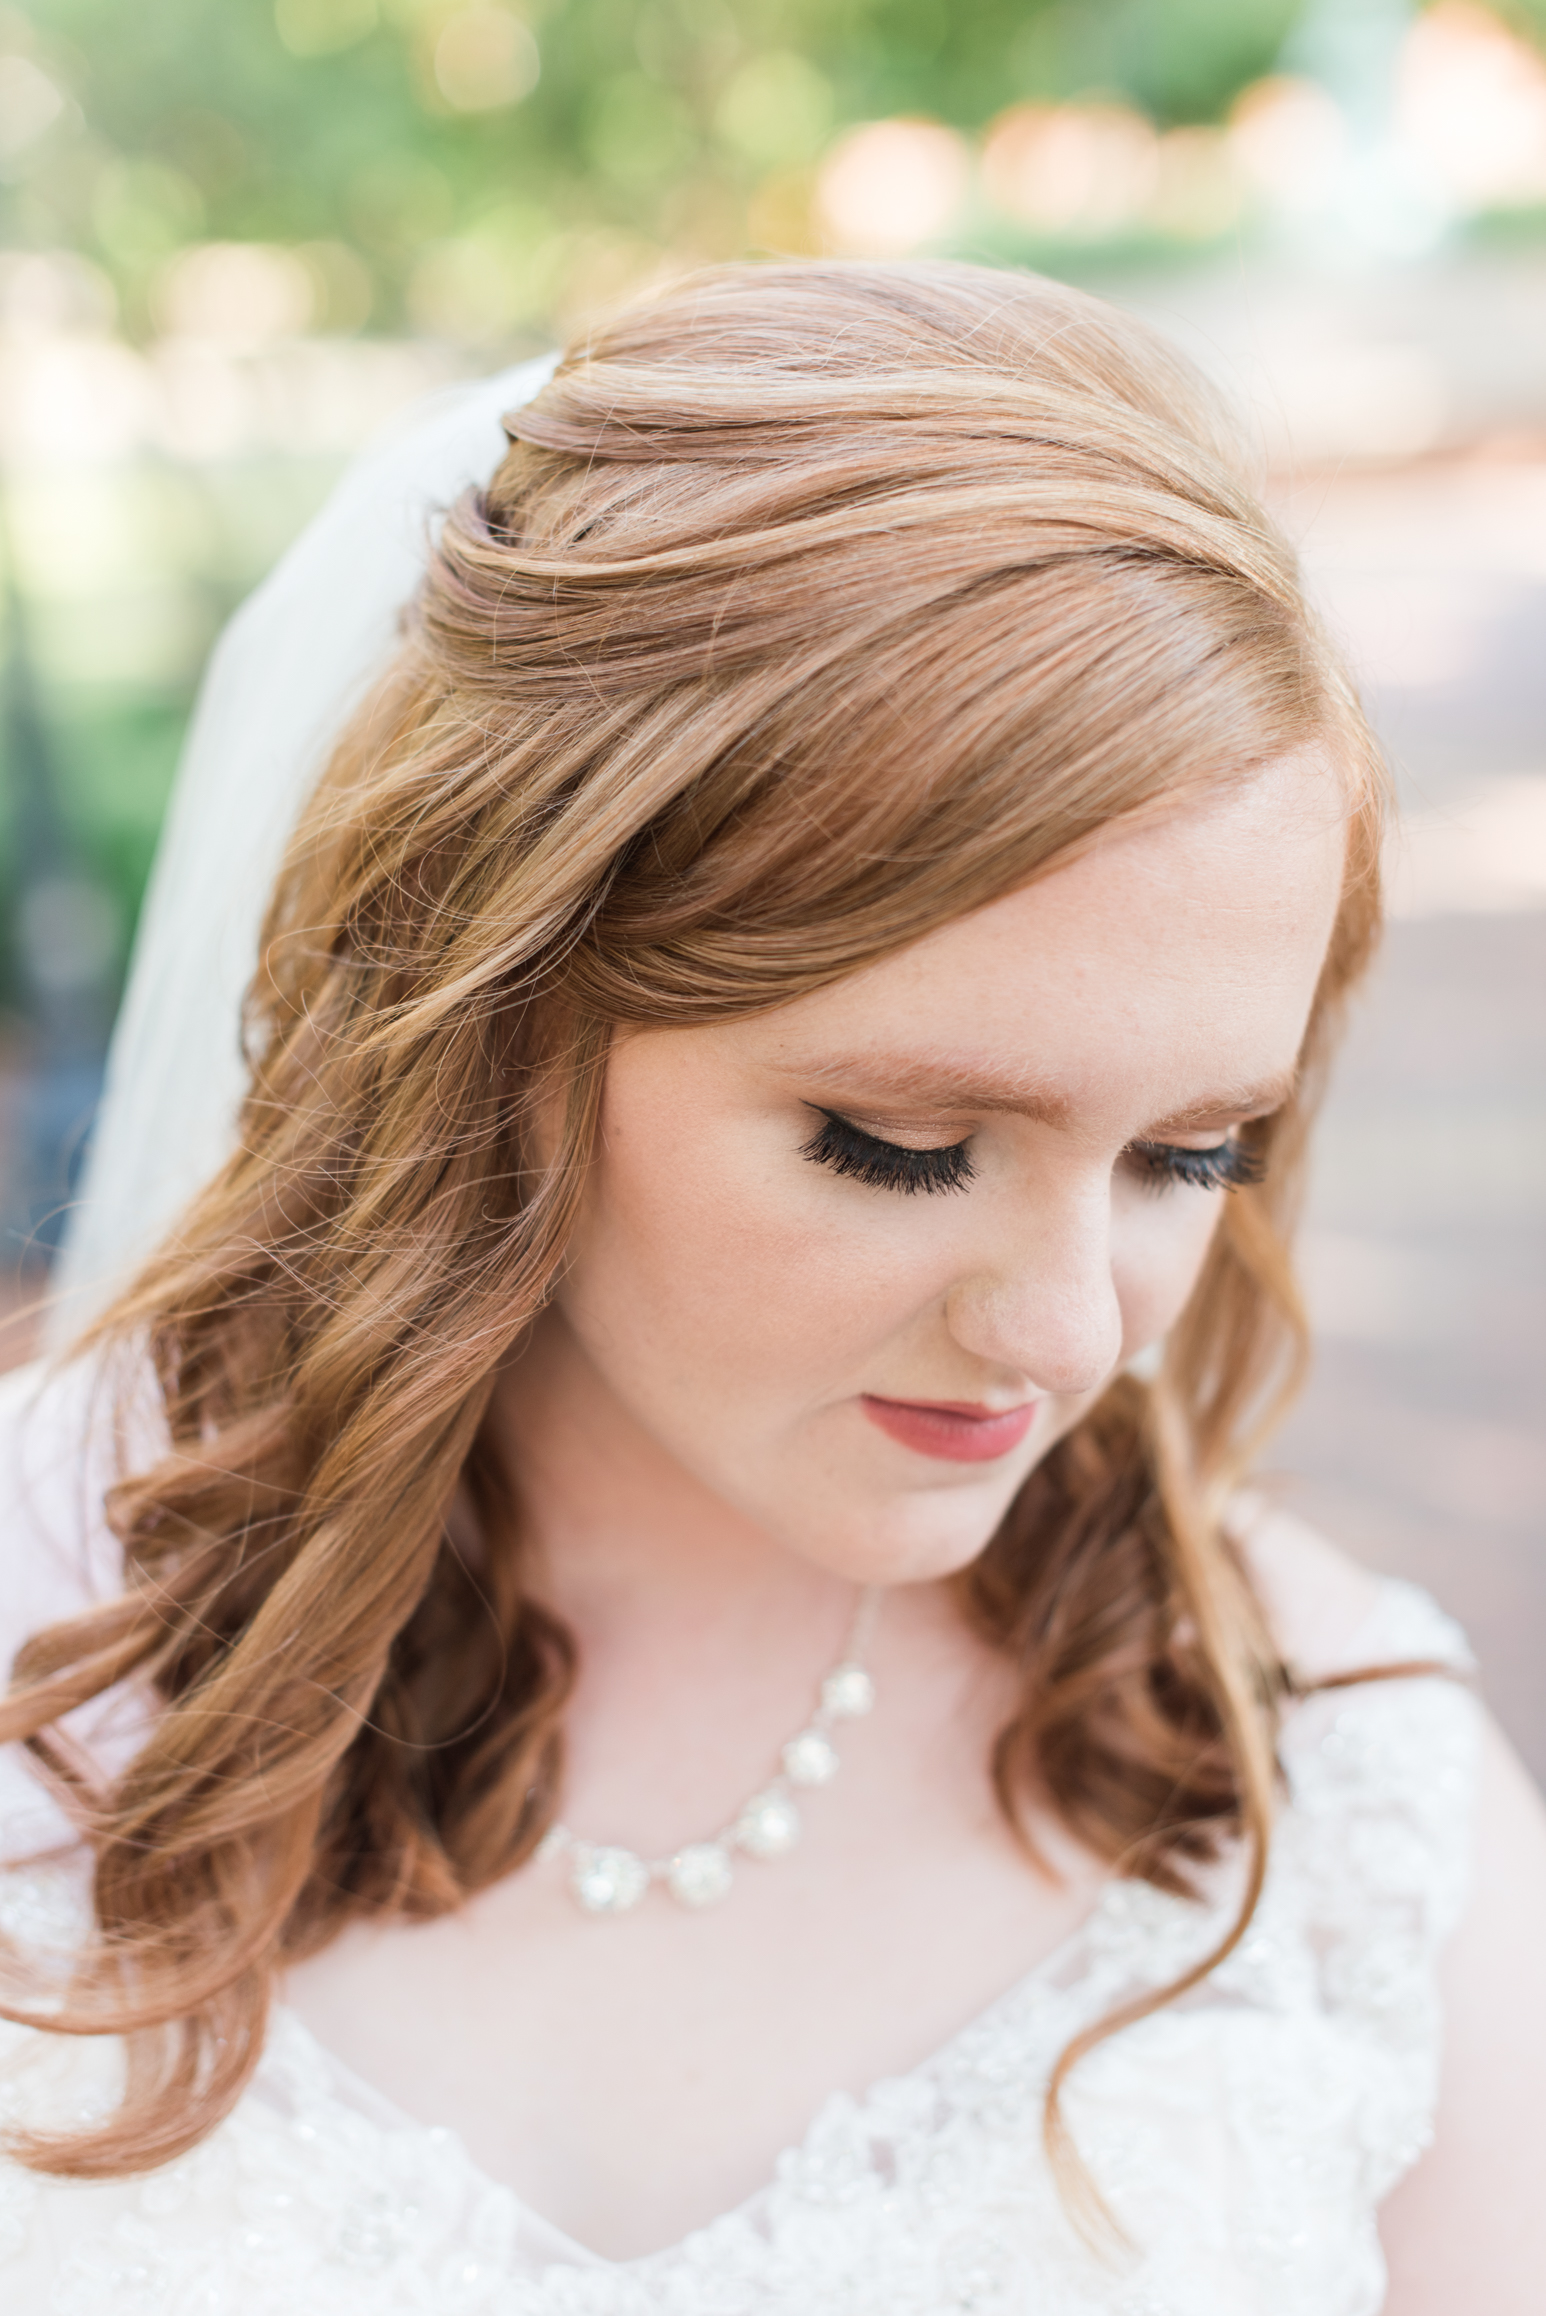 Bridal Portrait | Kimberly Cauble Photography